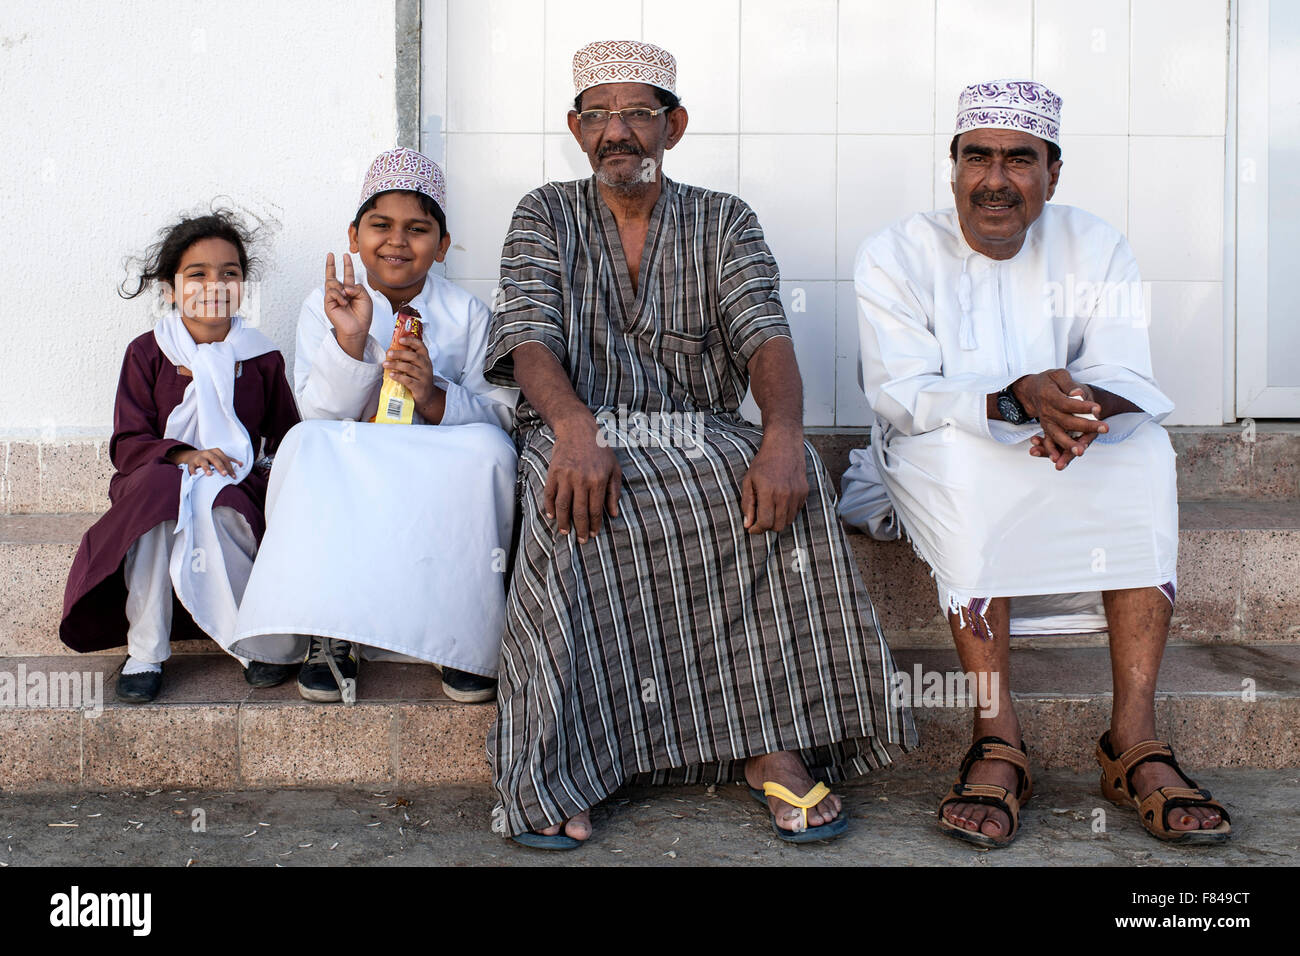 Omani men and children sitting in Old Muscat, part of the capital of the Sultanate of Oman. Stock Photo